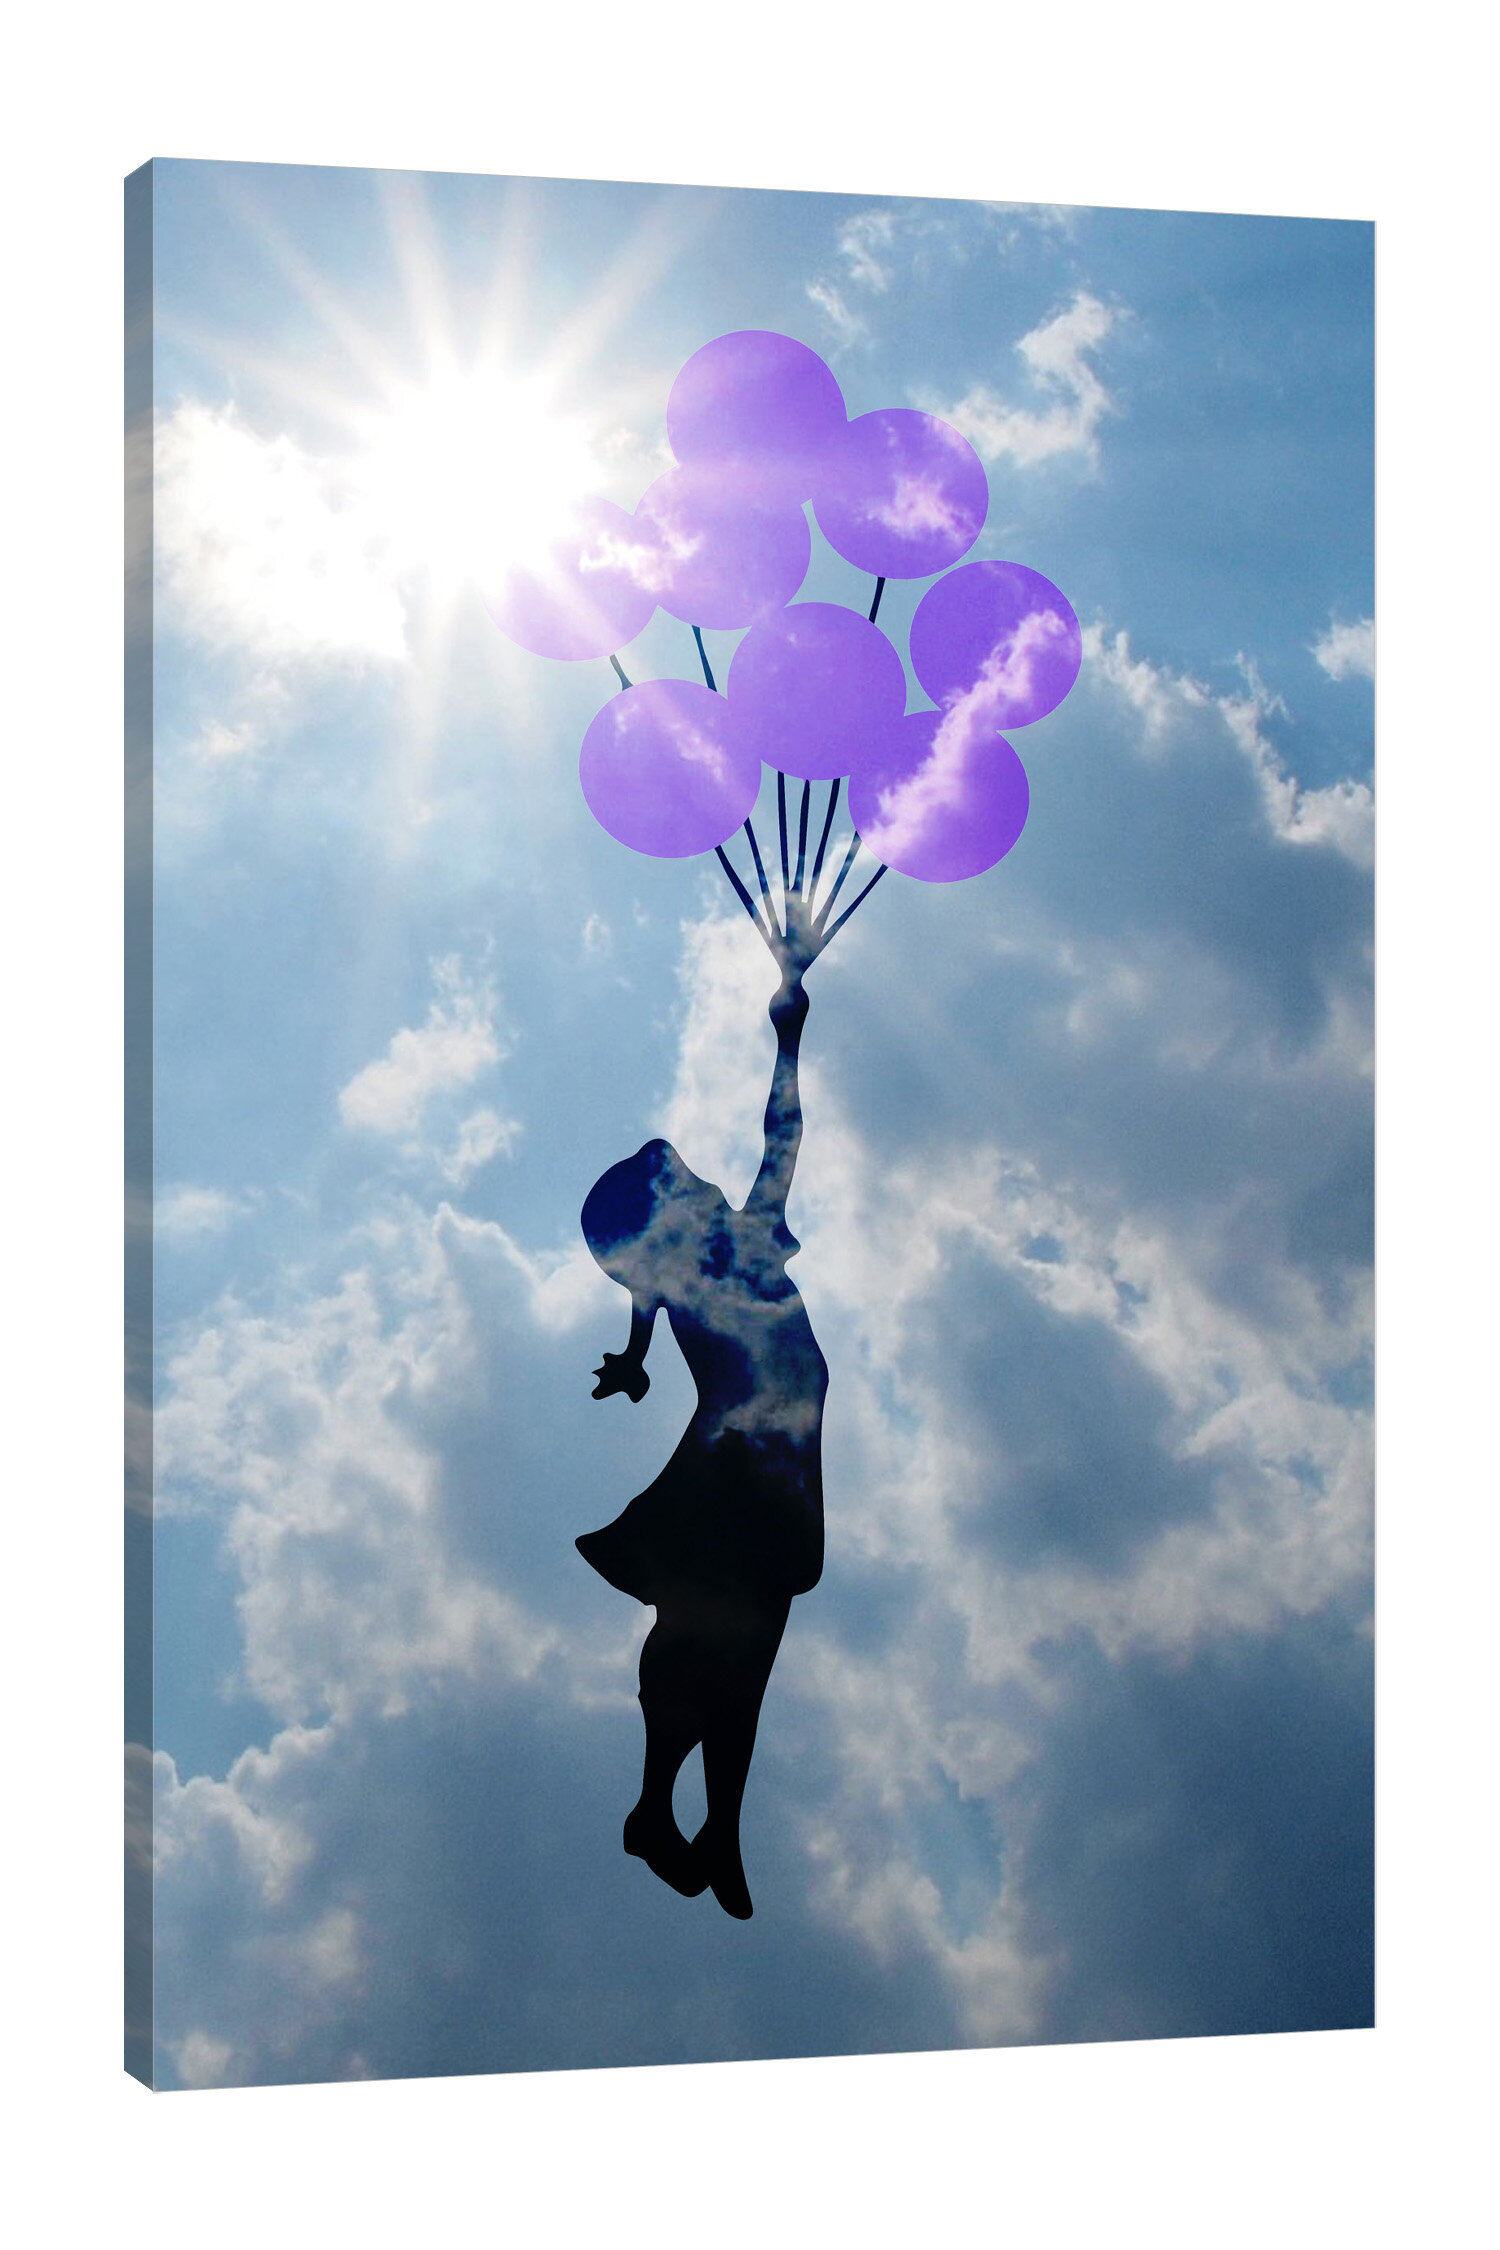 Red Barrel Studio® Flying Balloon Girl In The Clouds On Canvas by